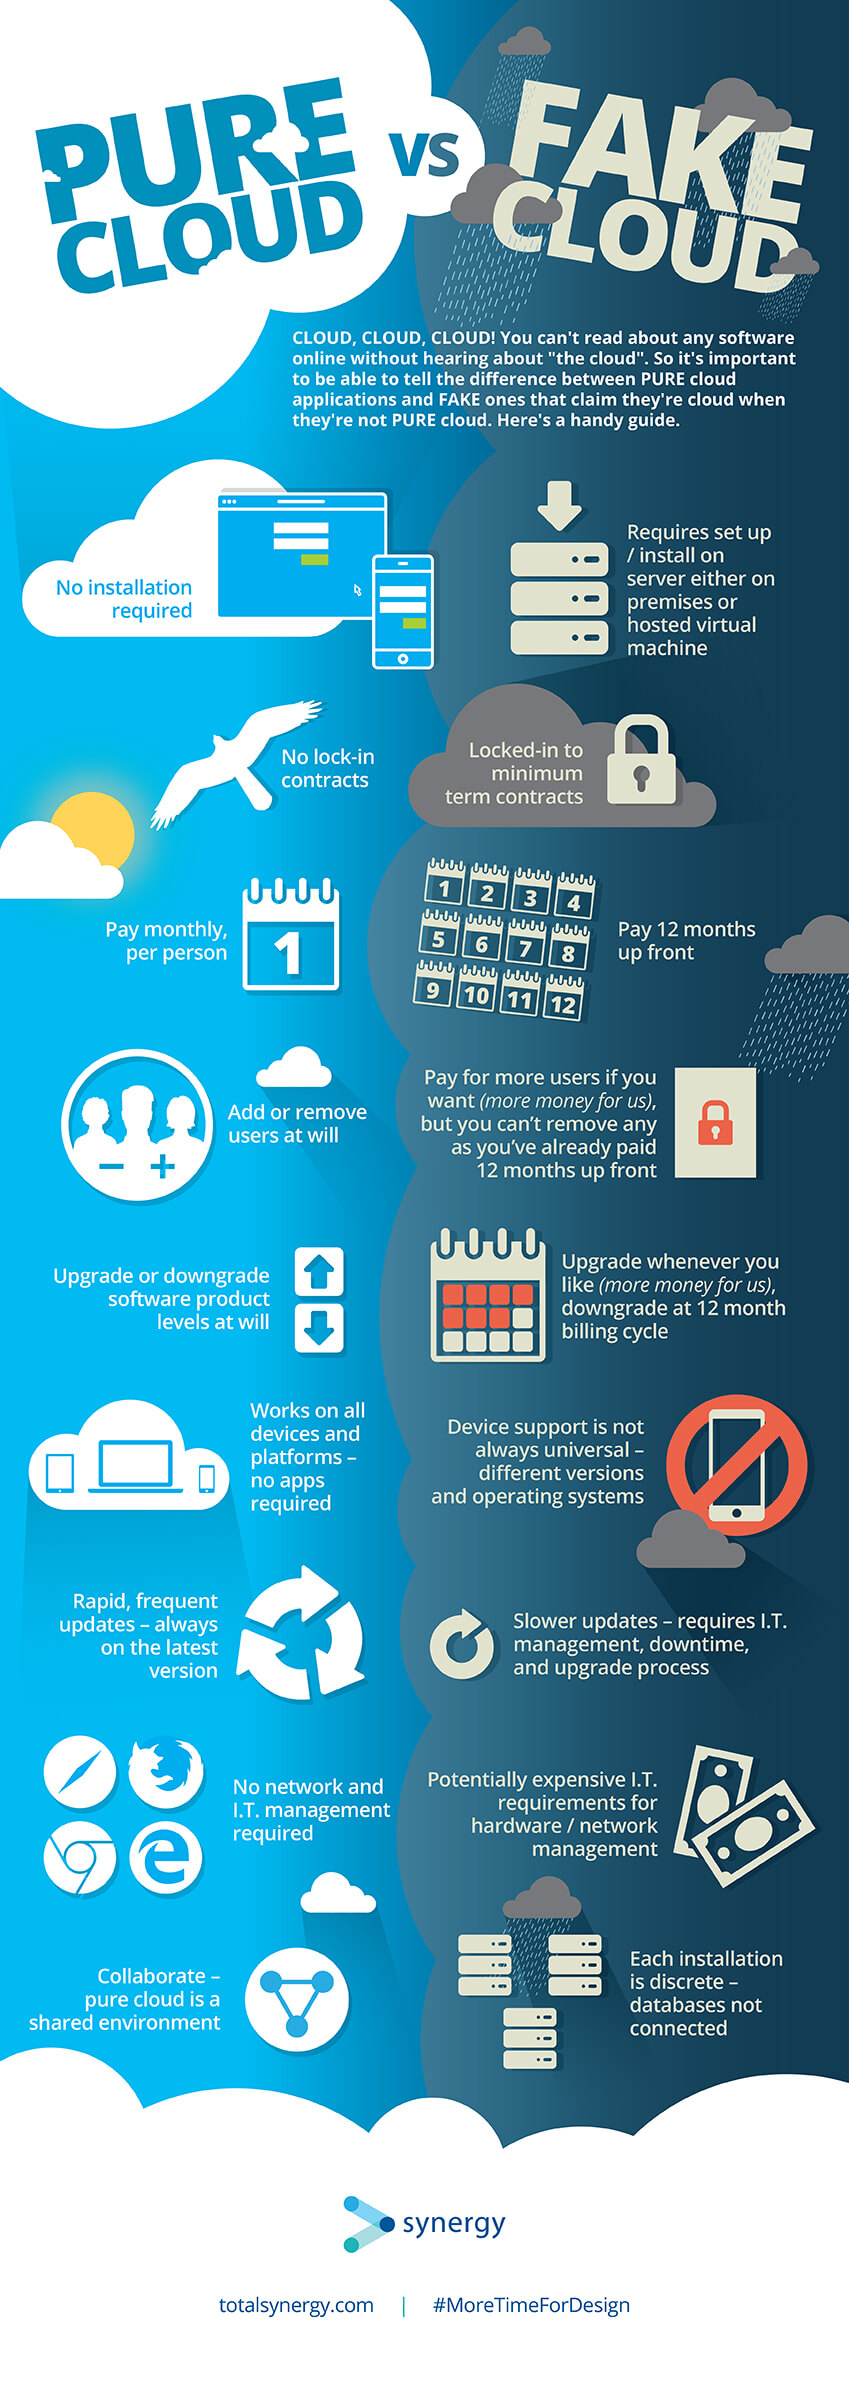 Pure cloud versus fake cloud — know the differences.